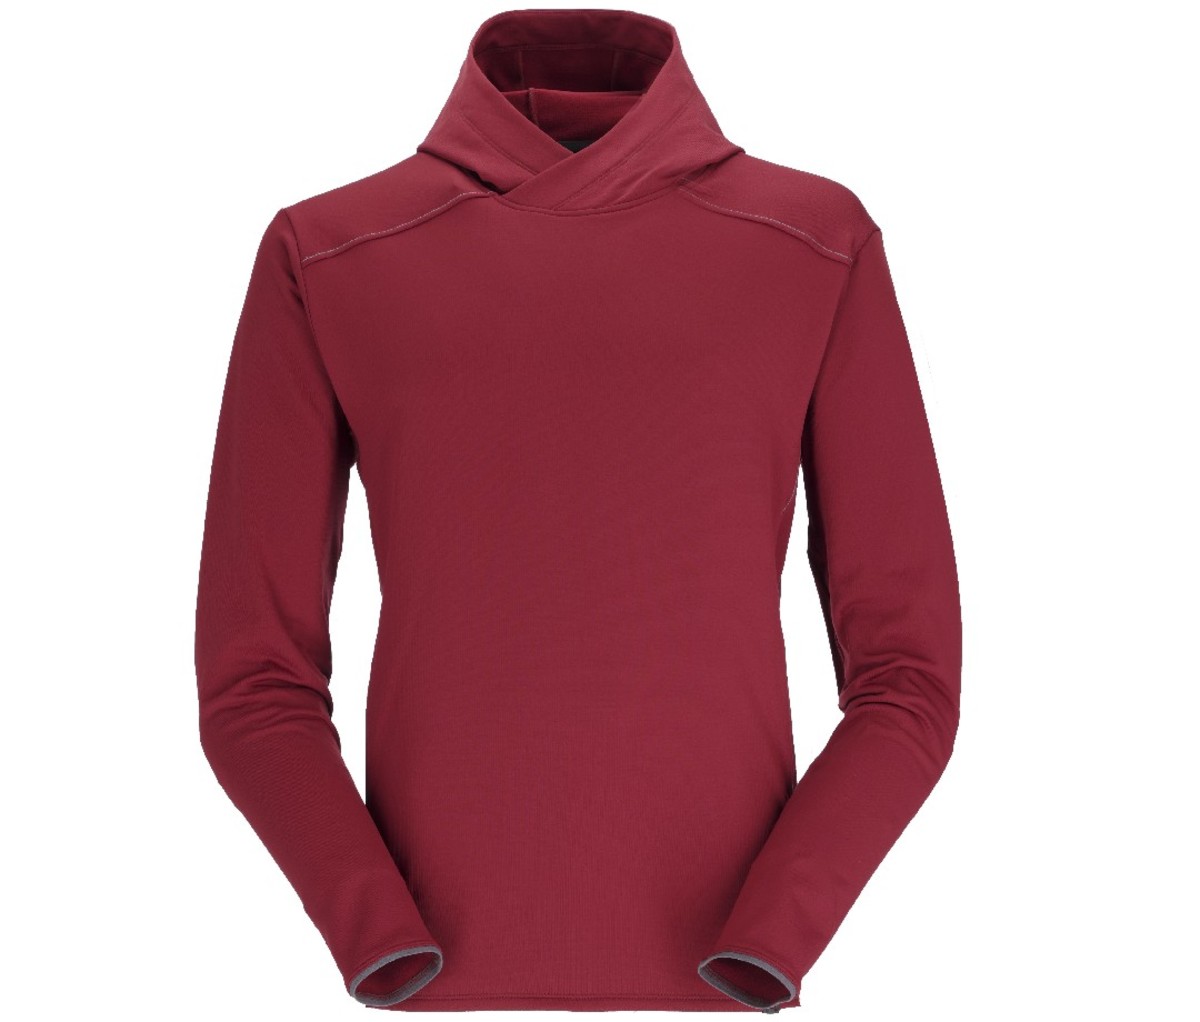 Rab One80 long sleeve midweight climbing hoody, oxblood red